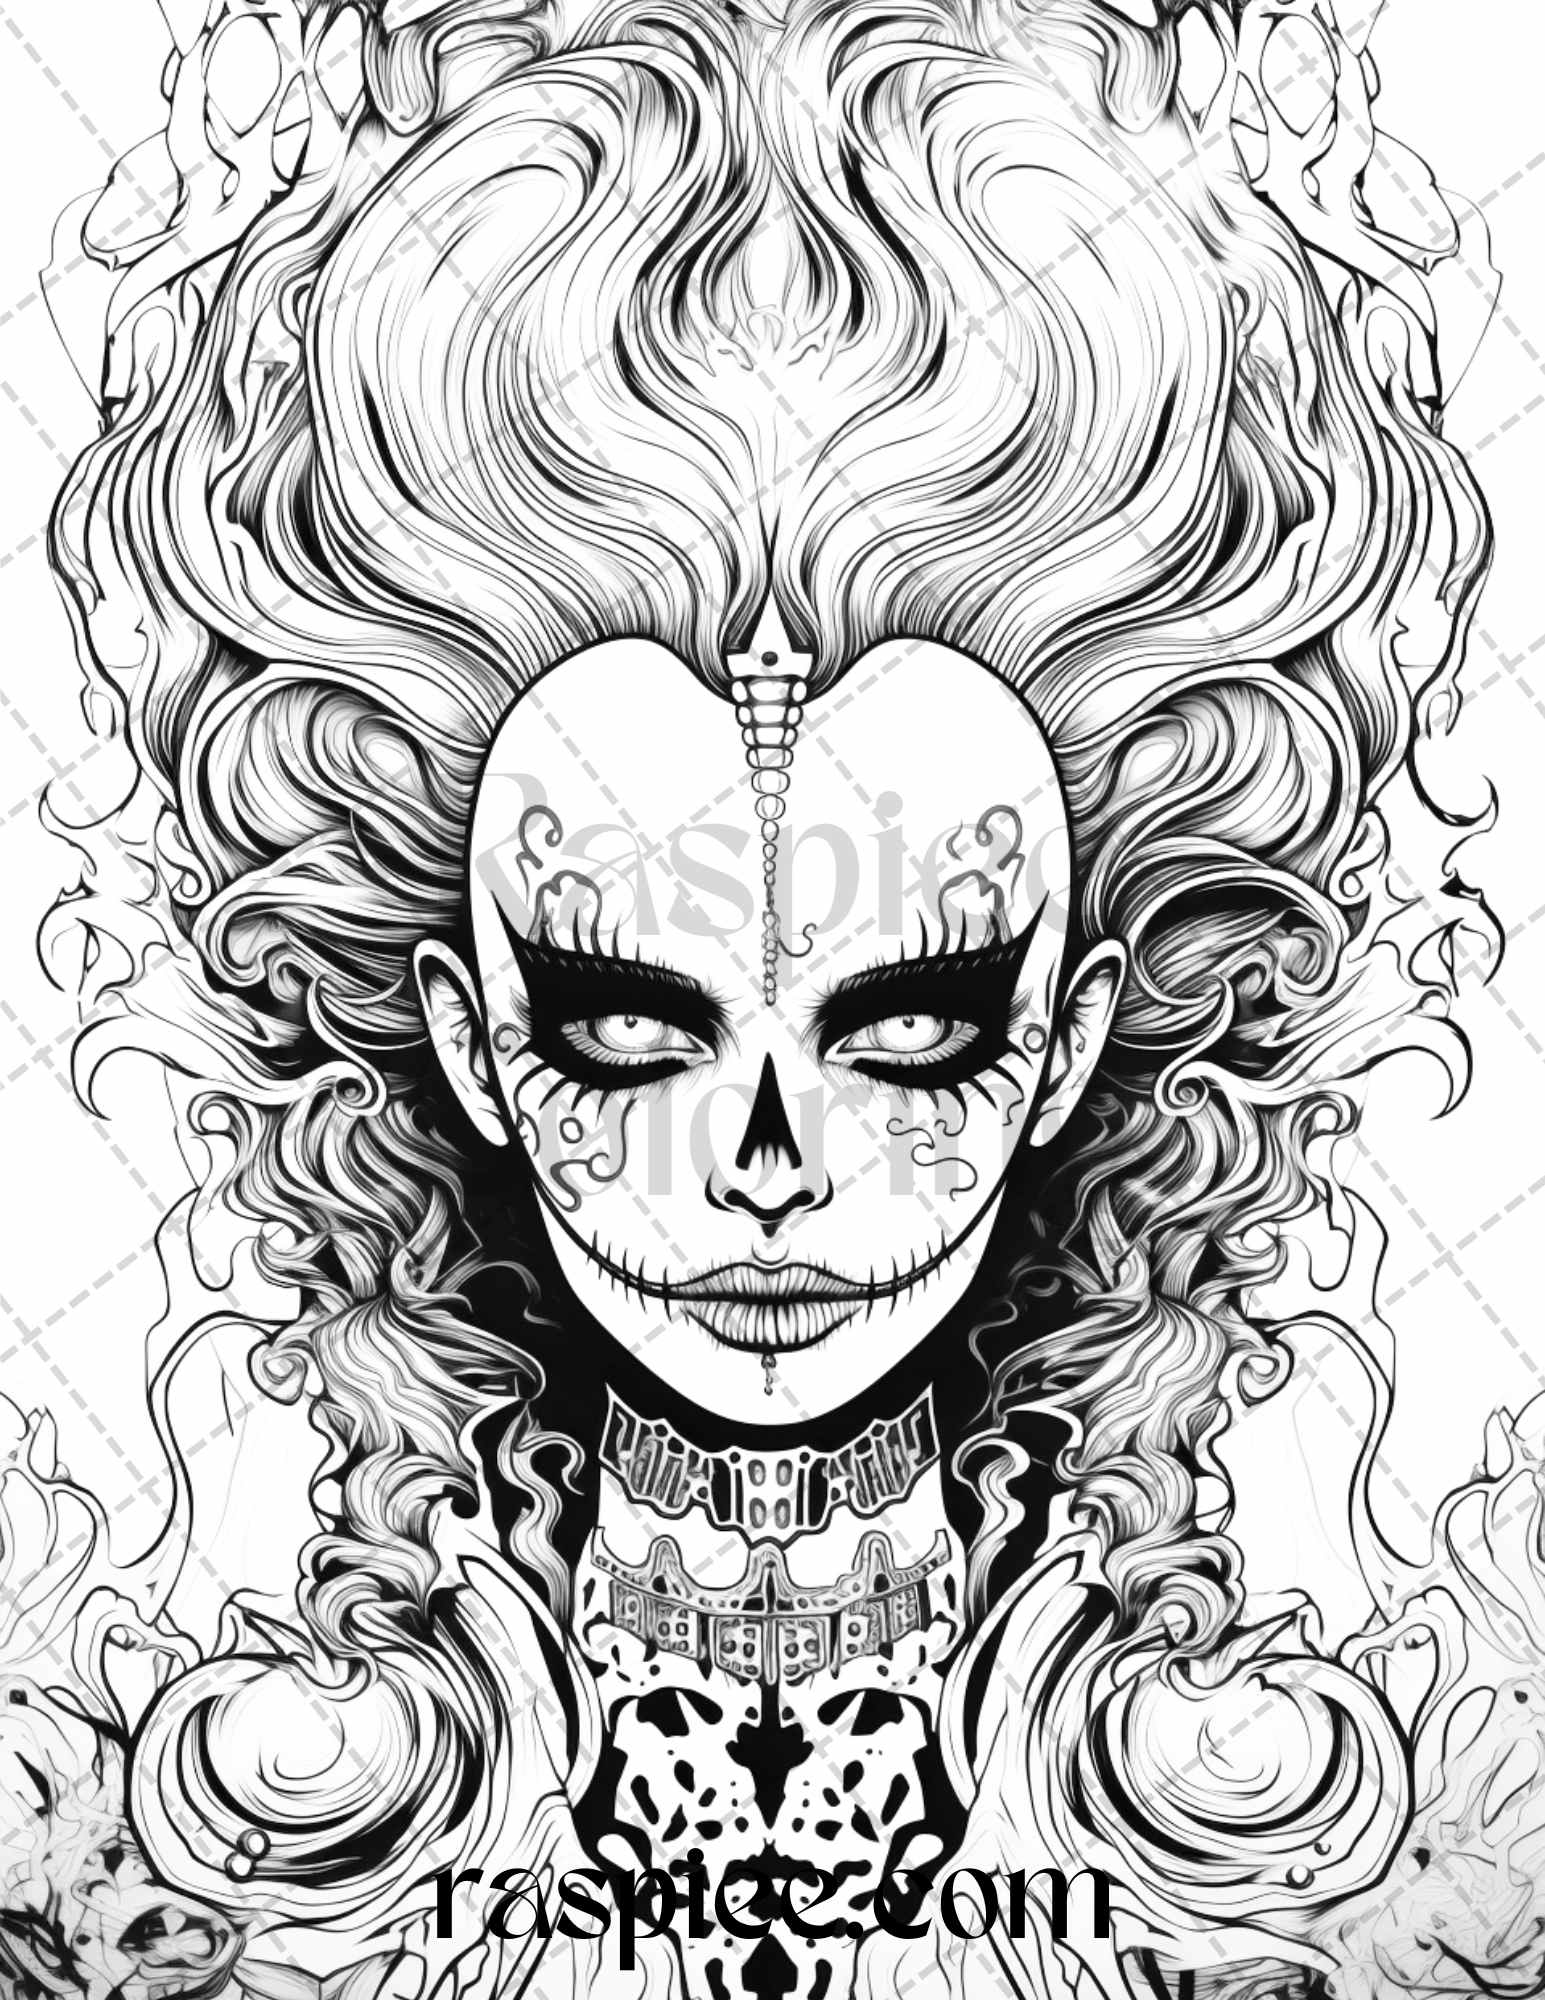 Spooky Miss Nightmare grayscale coloring page, Halloween adult coloring printable, Spooky grayscale art for adults, Halloween printable coloring book, Gothic witch coloring page, Haunted house grayscale illustration, Vampire art coloring page, Halloween pumpkin grayscale coloring, Creepy ghost illustration for adults, Macabre horror coloring page